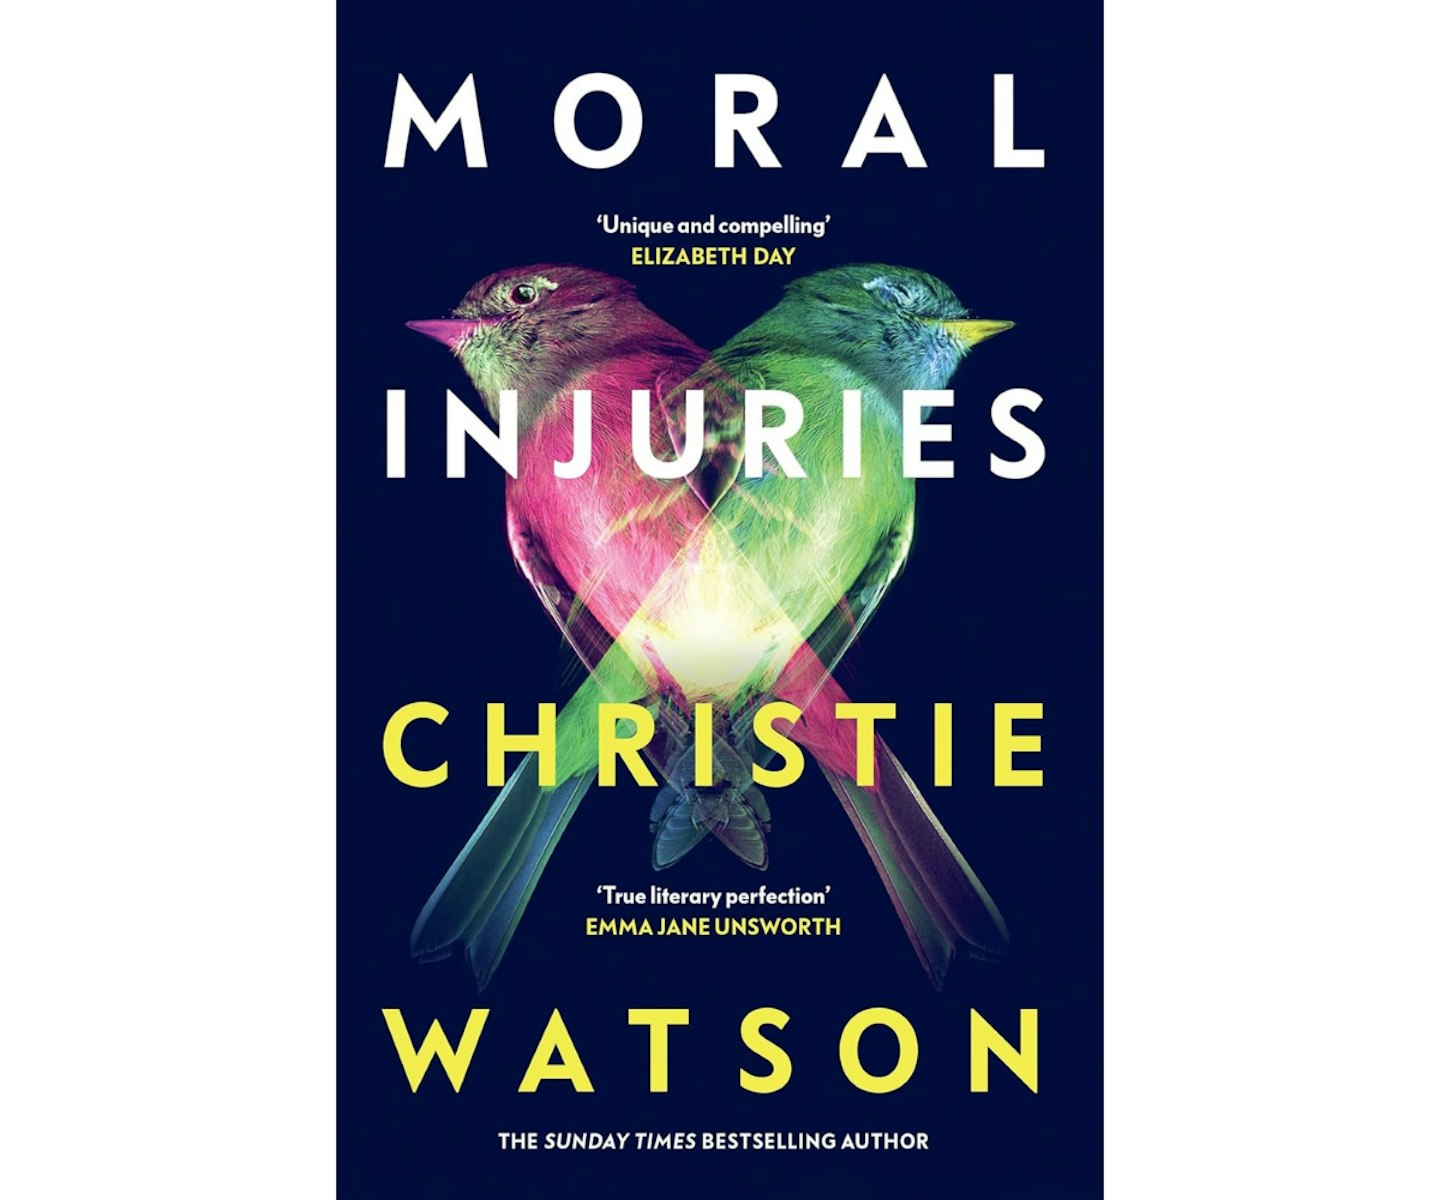 Moral Injuries by Christie Watson